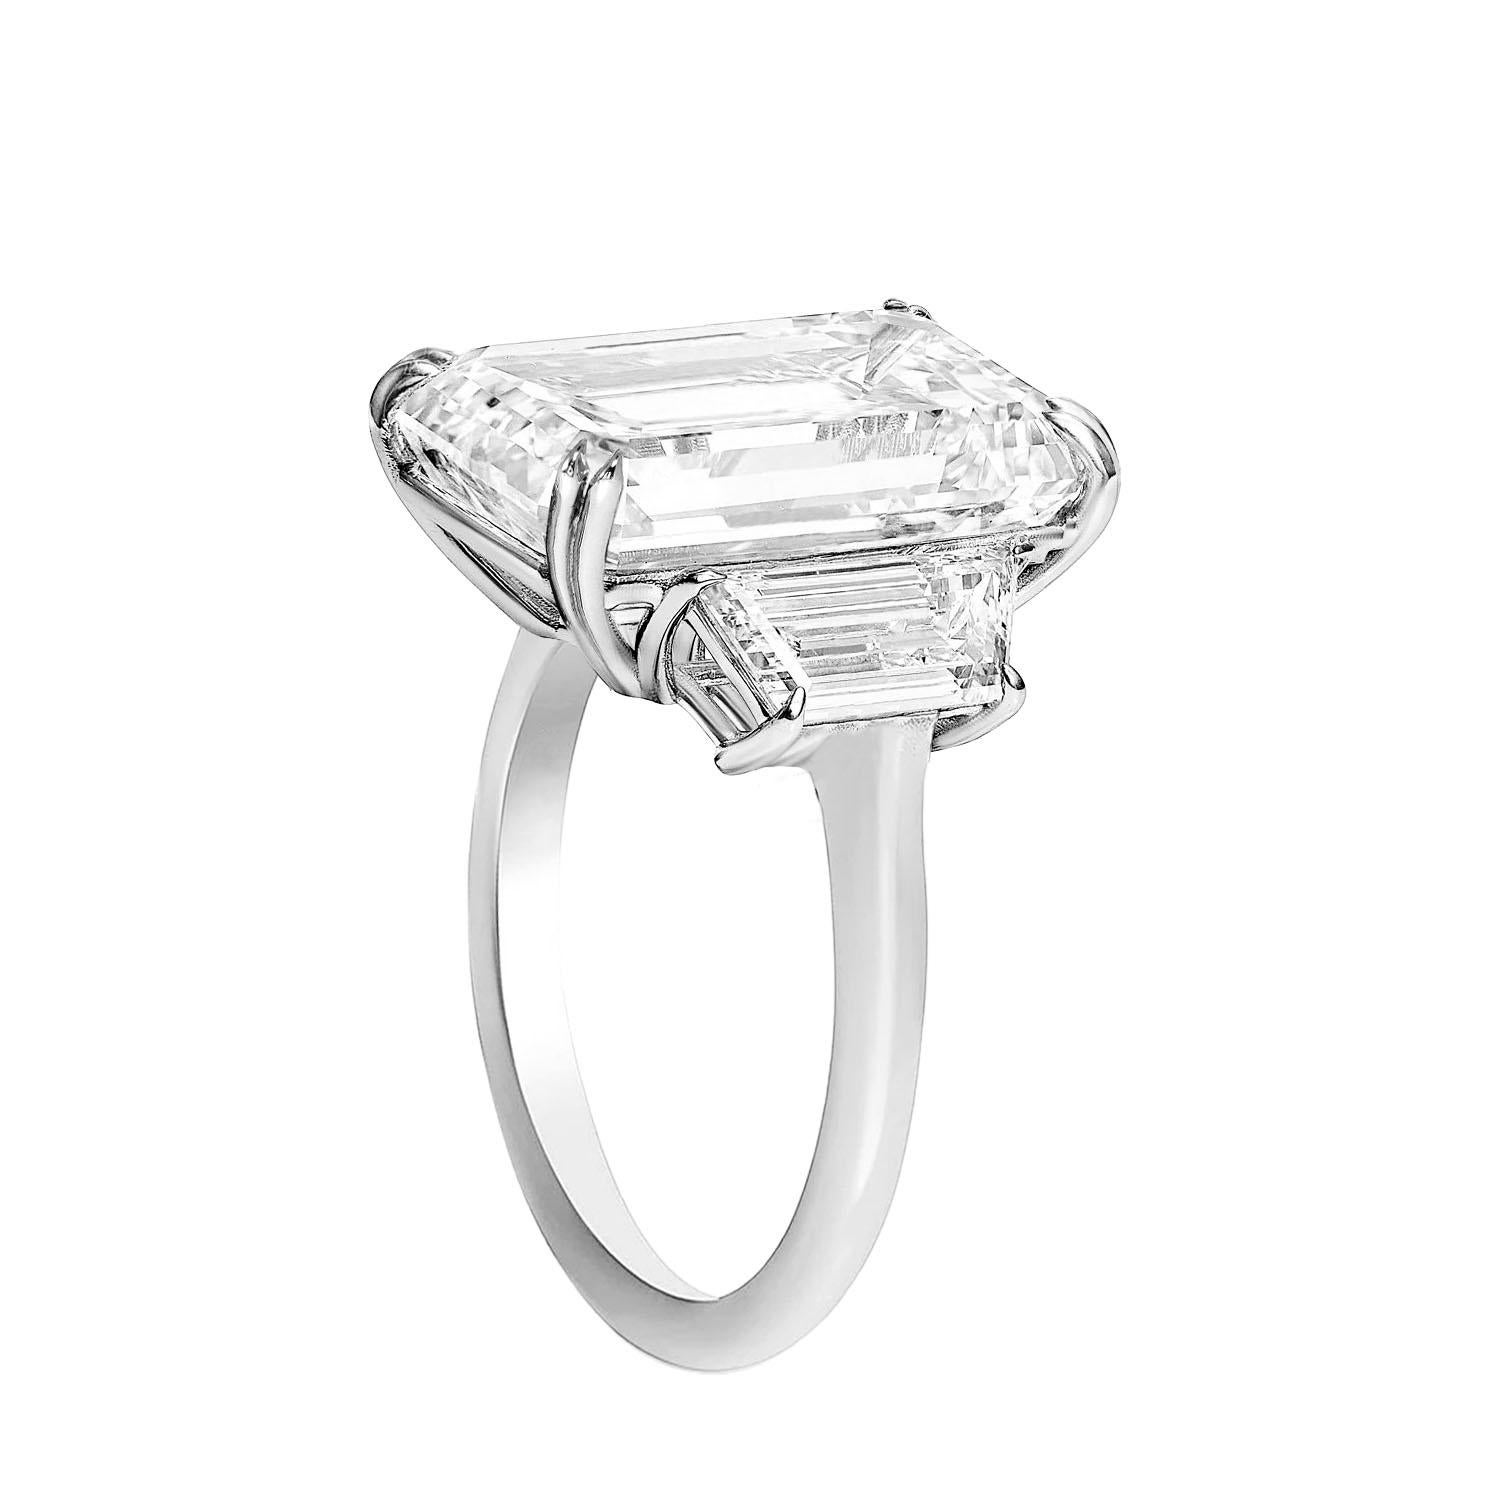 Modern Exceptional Type 2A GIA Certified 18 Carat Emerald Cut Diamond Ring For Sale